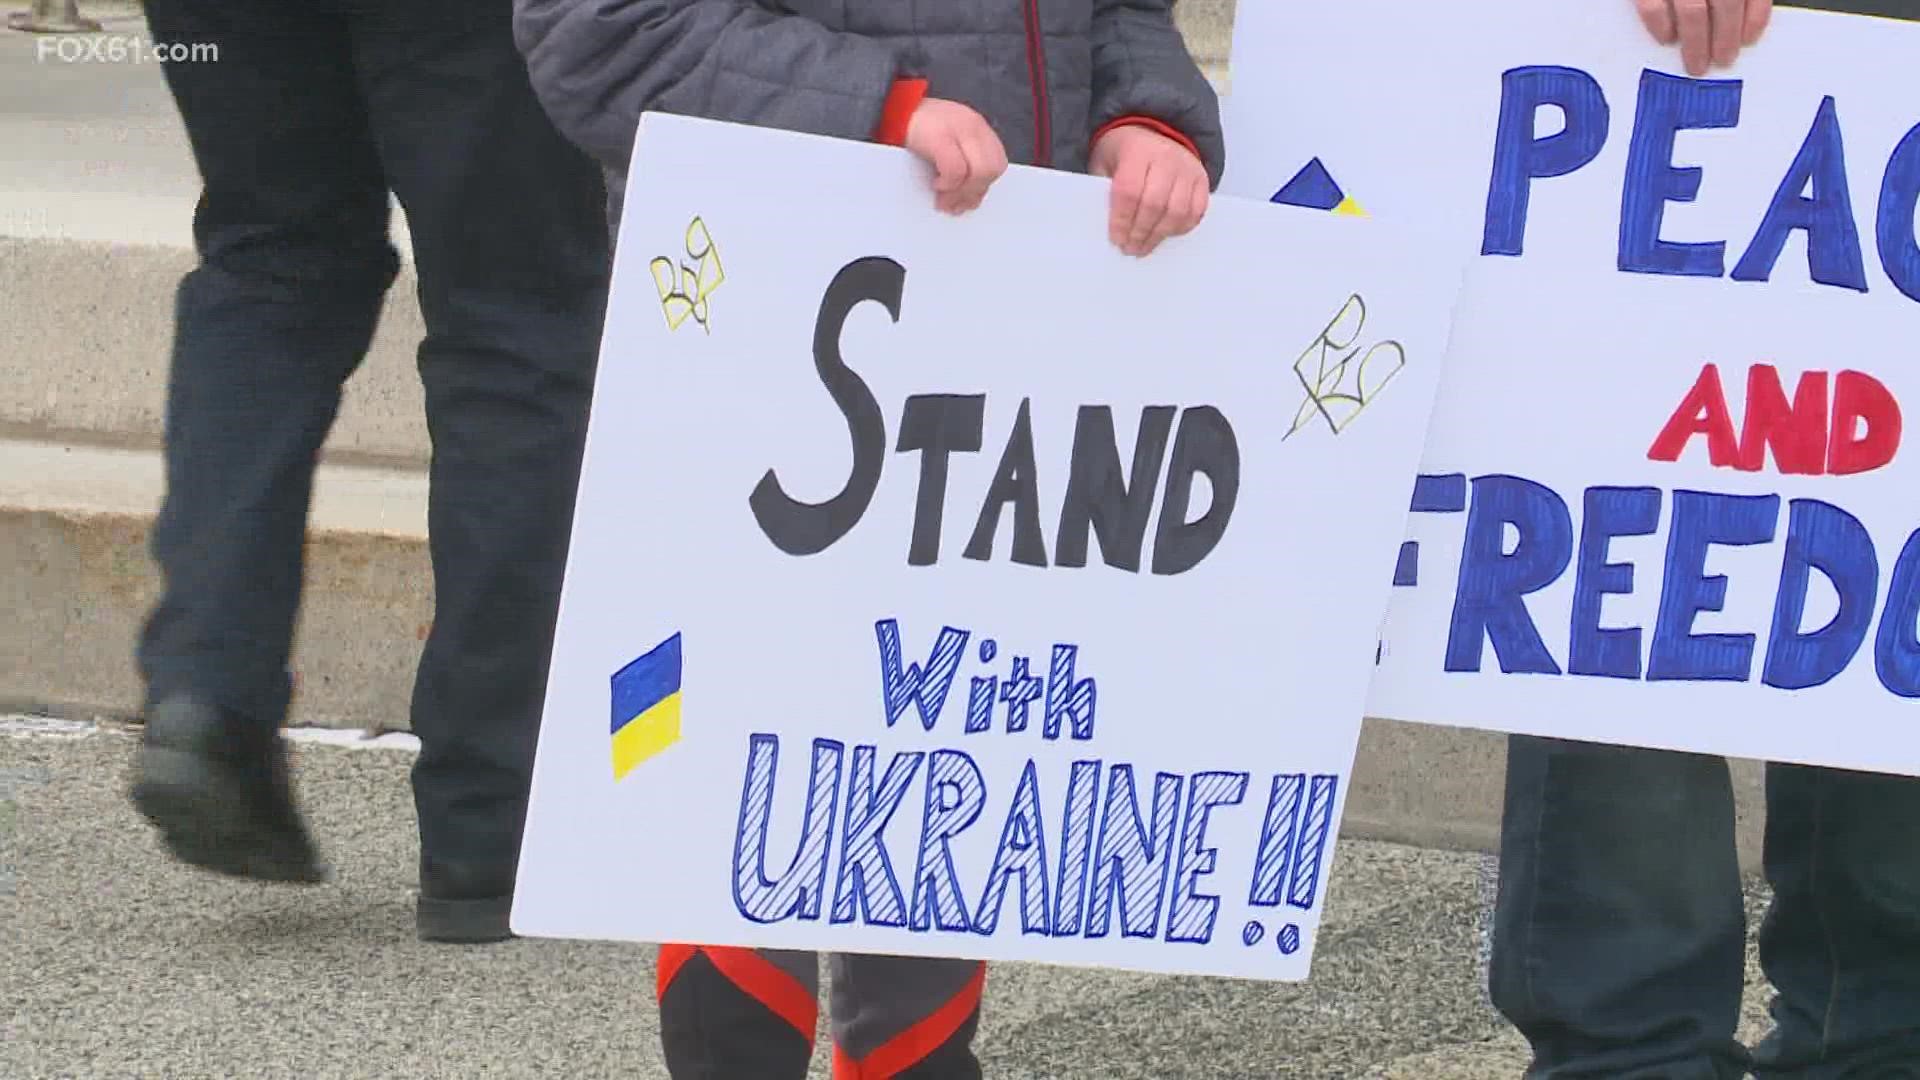 U.S. officials monitor situation as tensions rise between Russia and Ukraine Sunday.